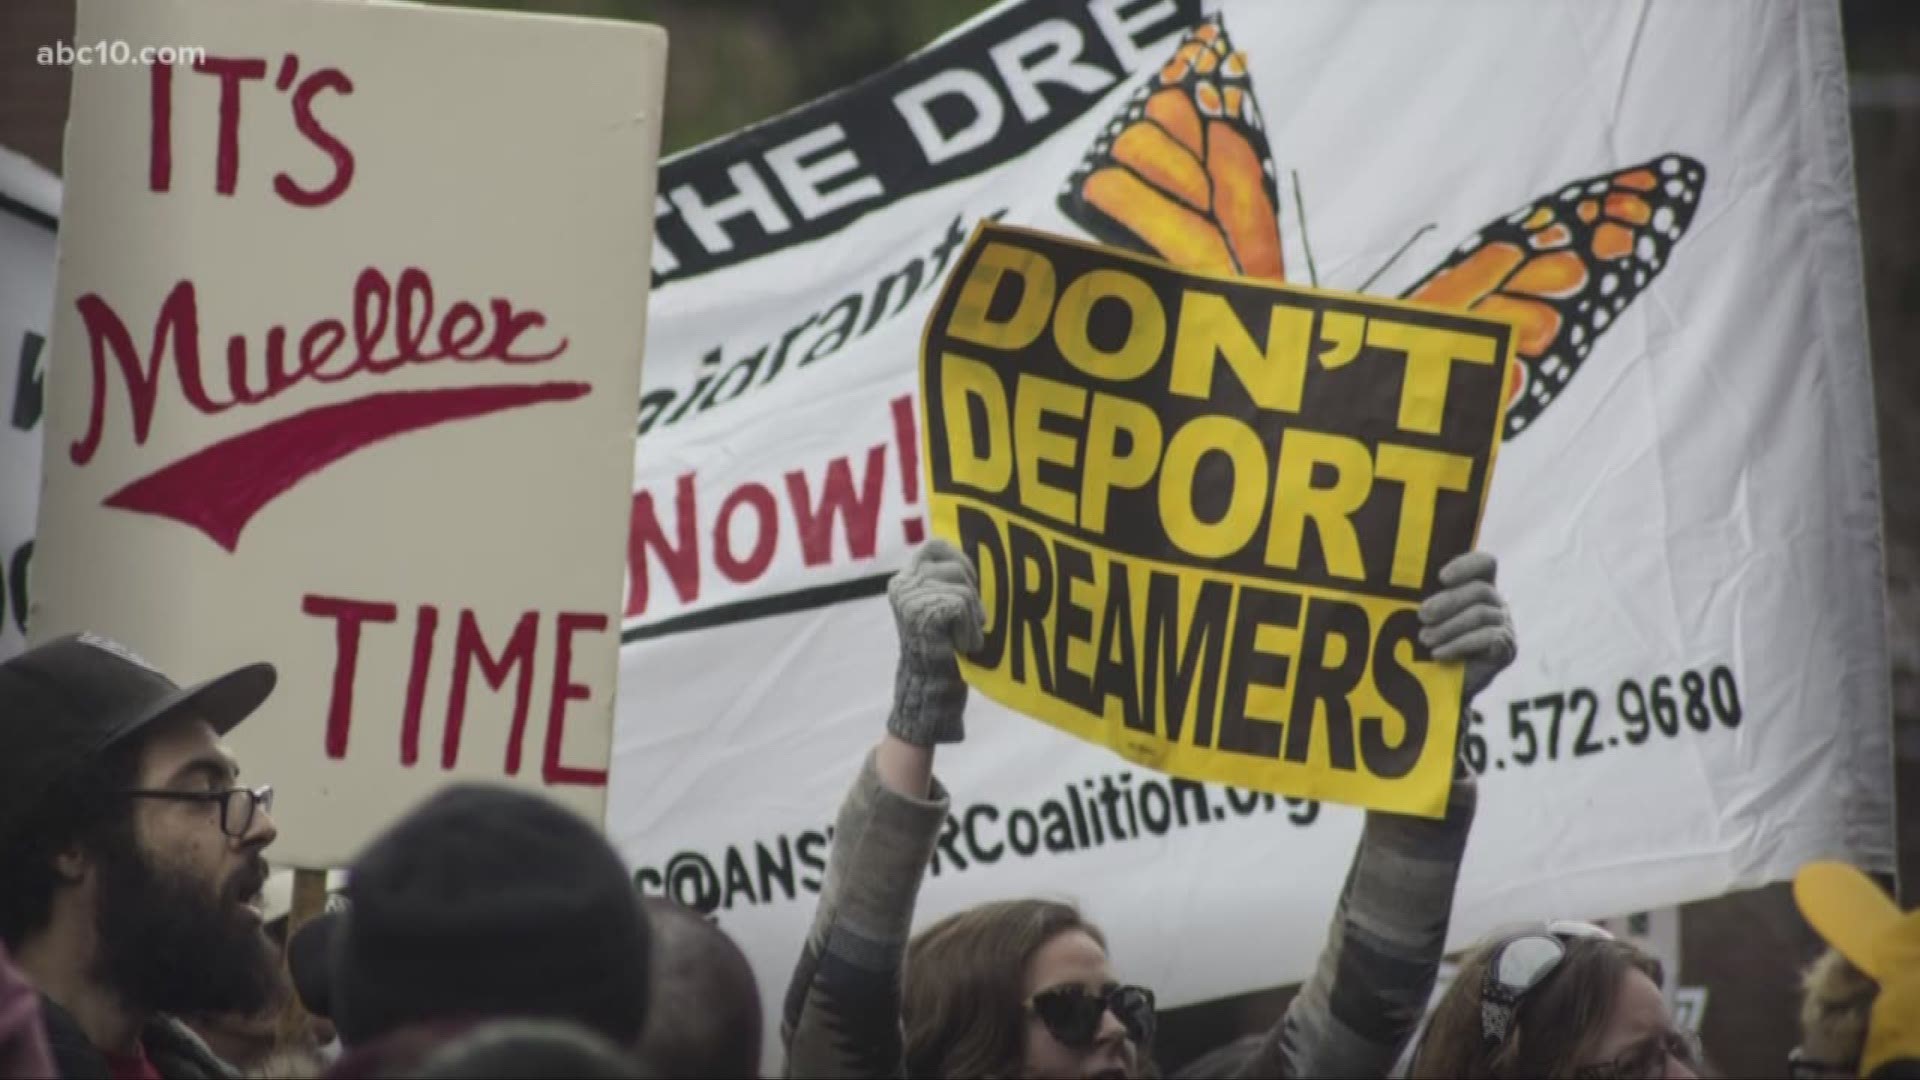 Layla Razavi is the policy director for the California Immigration Policy Center. The organization advocates for immigrants’ rights. She criticized the President’s offer which she contends offered no real solution to America’s immigration issues.